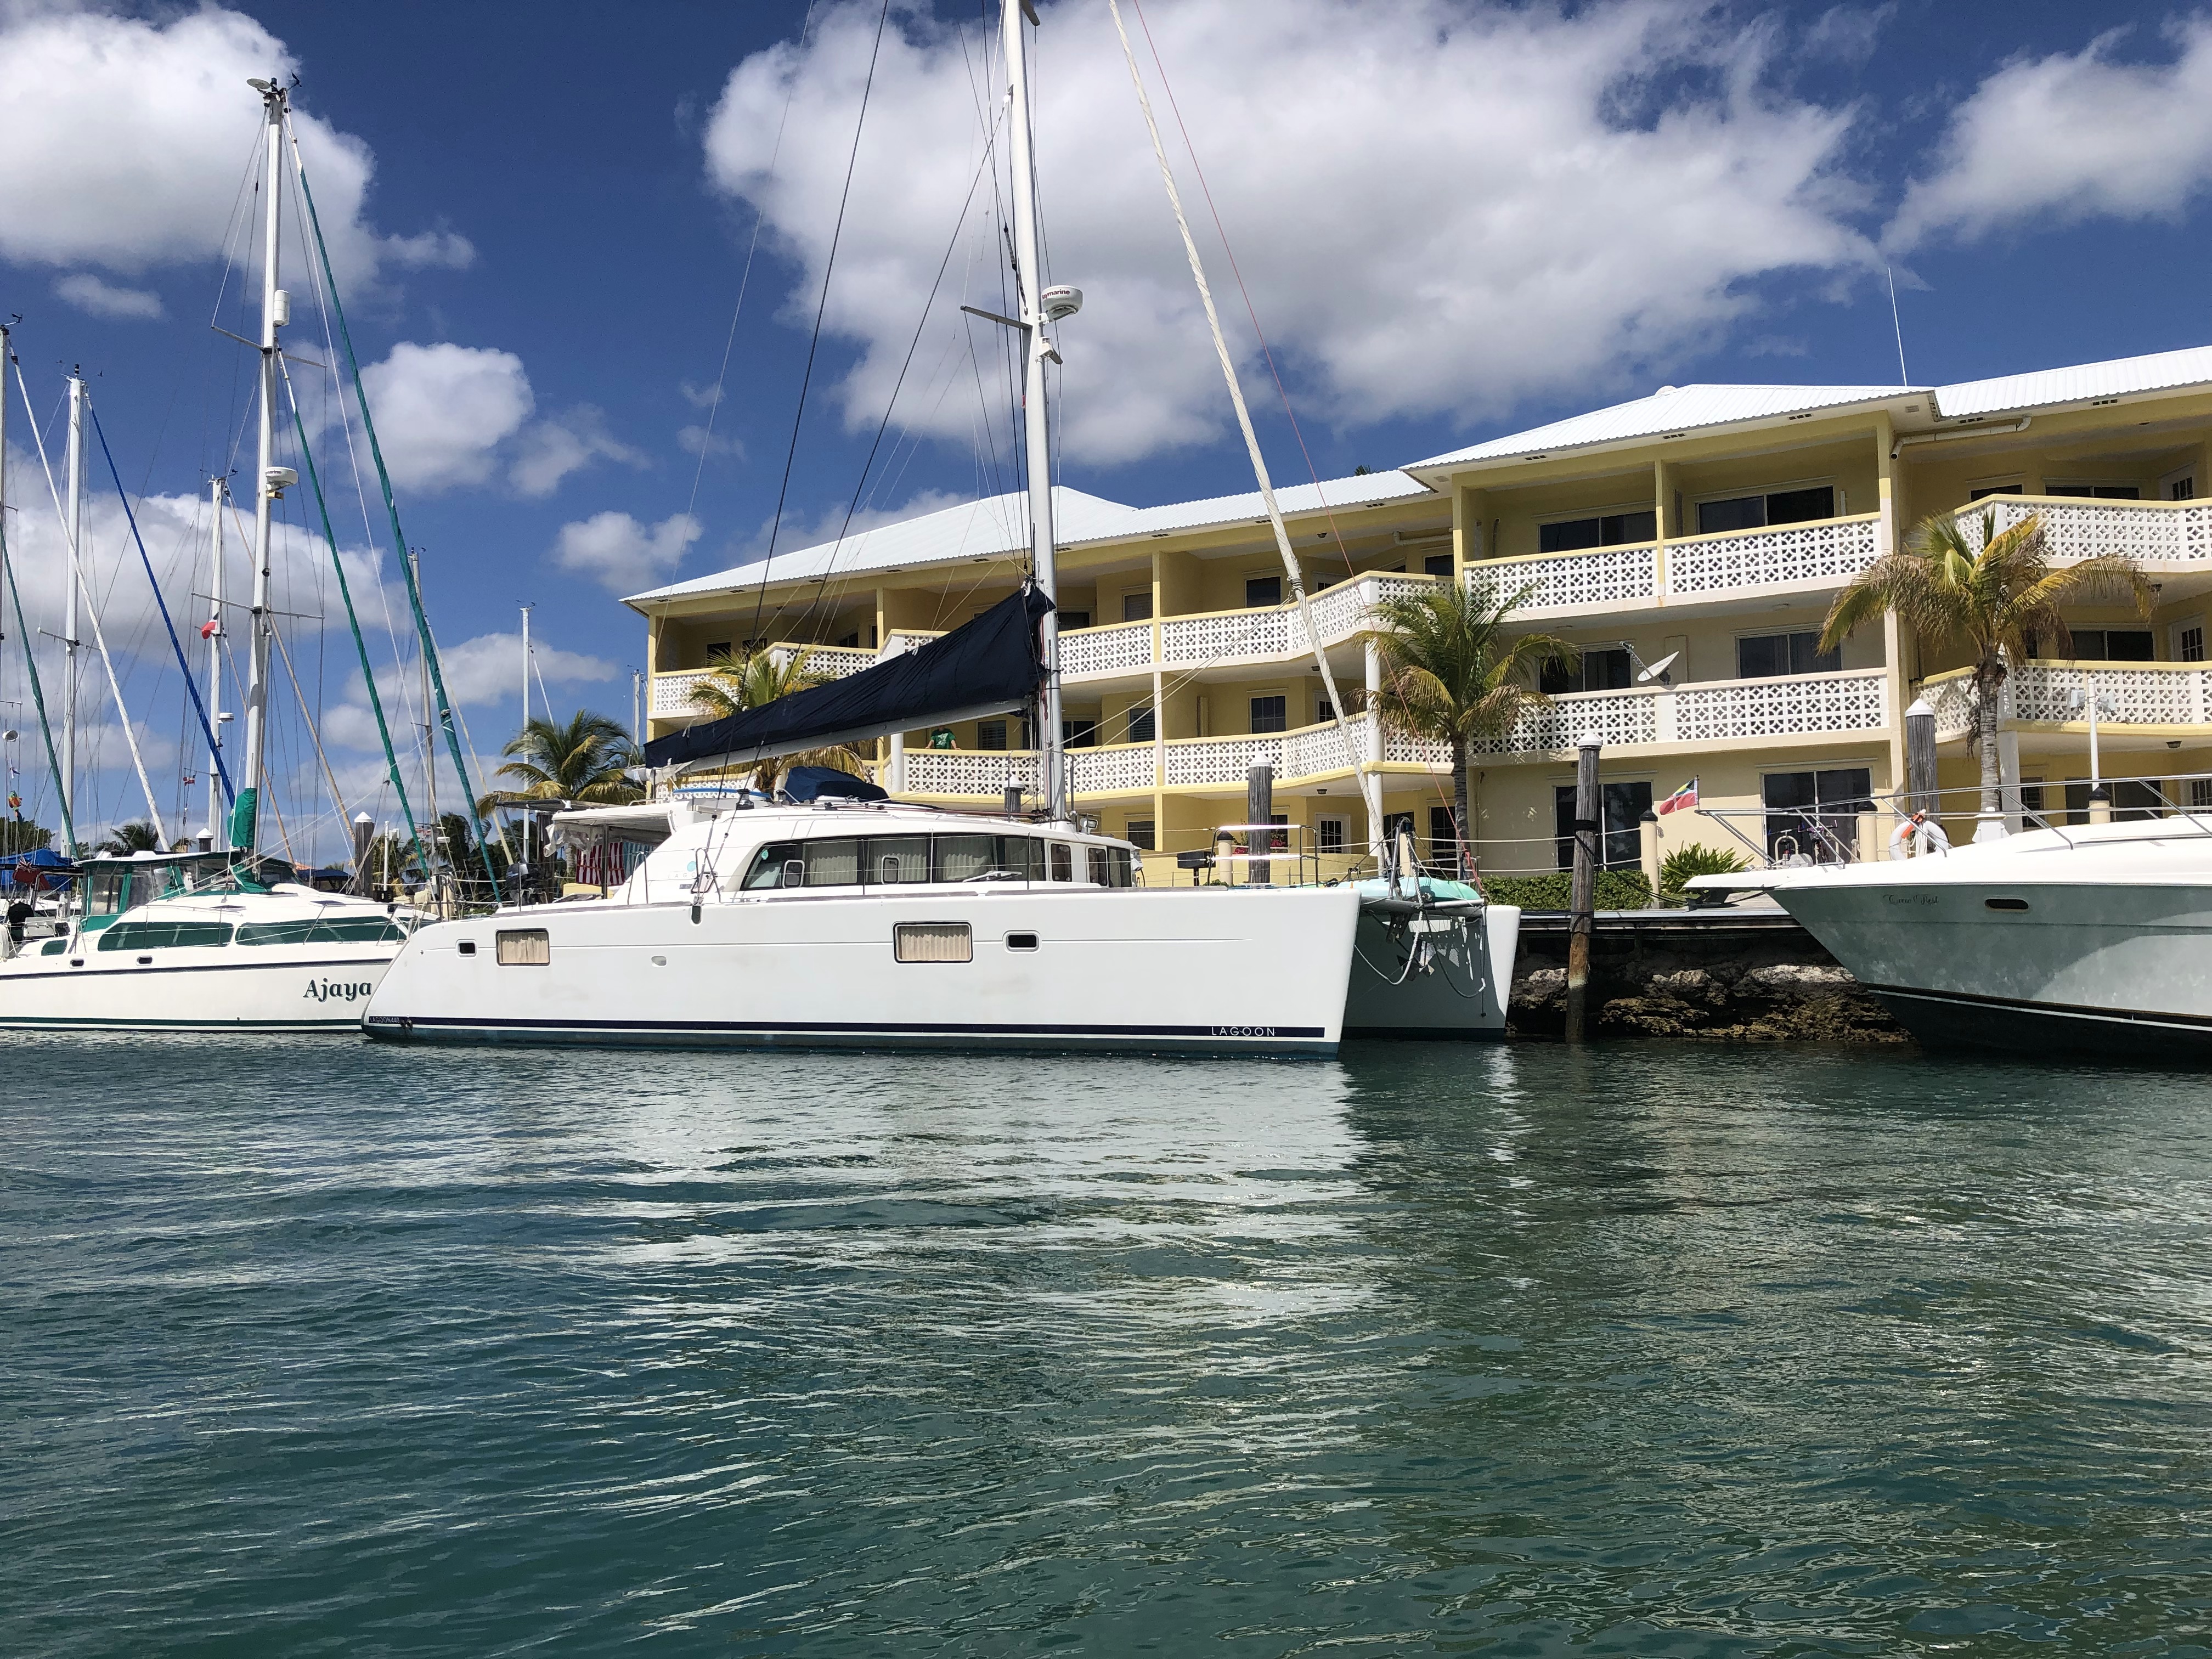 Most Popular Catamarans Online In Last 30 Days | # 1 is Lagoon 440 'Yachta Relax'